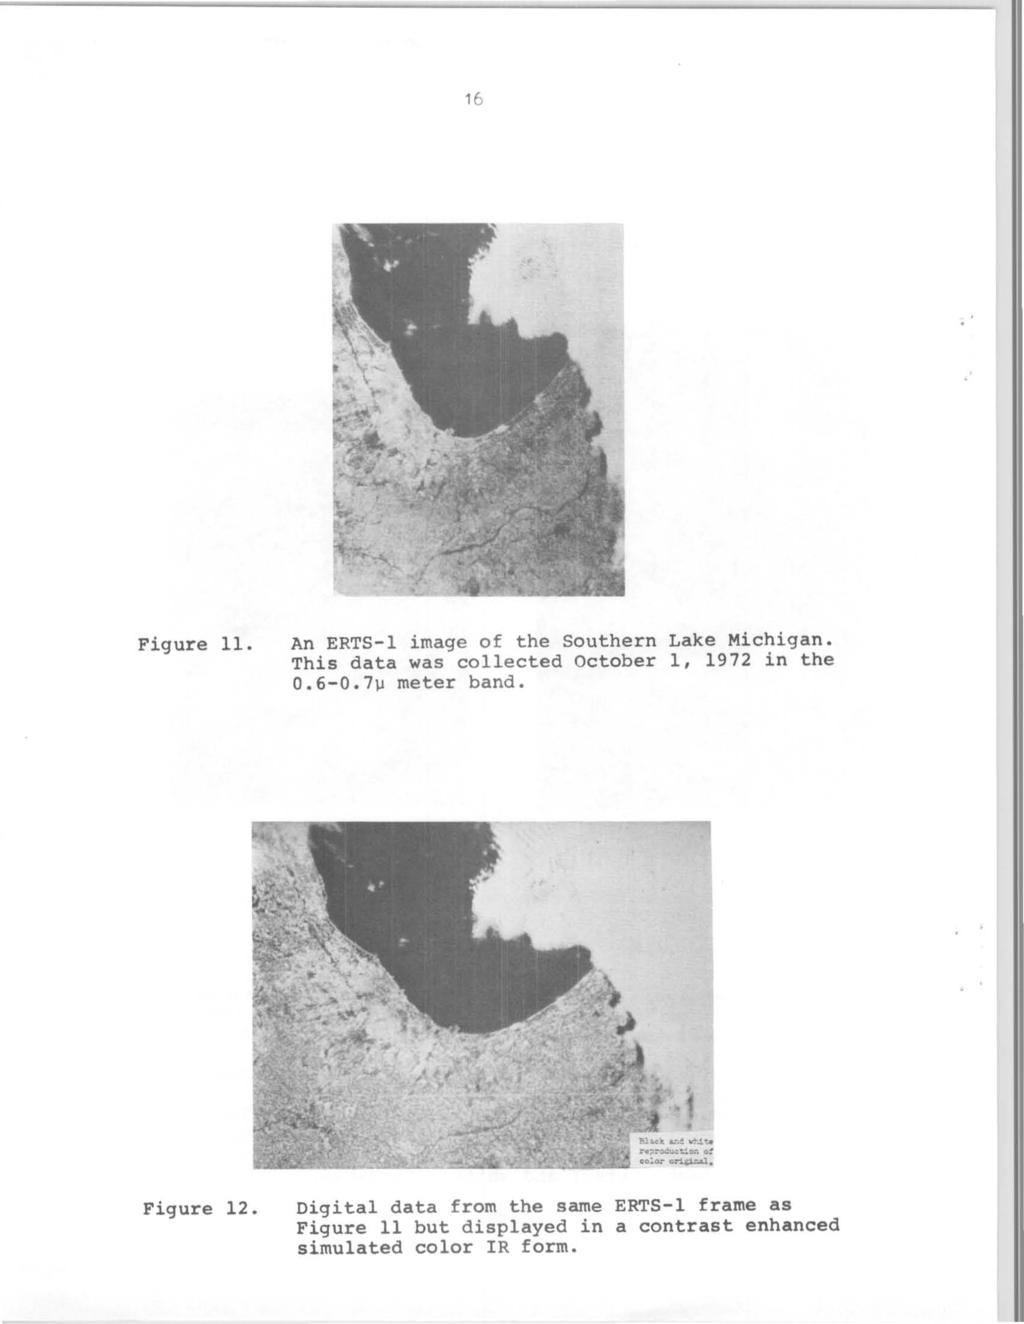 r 16 Figure 11. An ERTS-l image of the Southern Lake Michigan. This data was collected October 1, 1972 in the O.6-0.